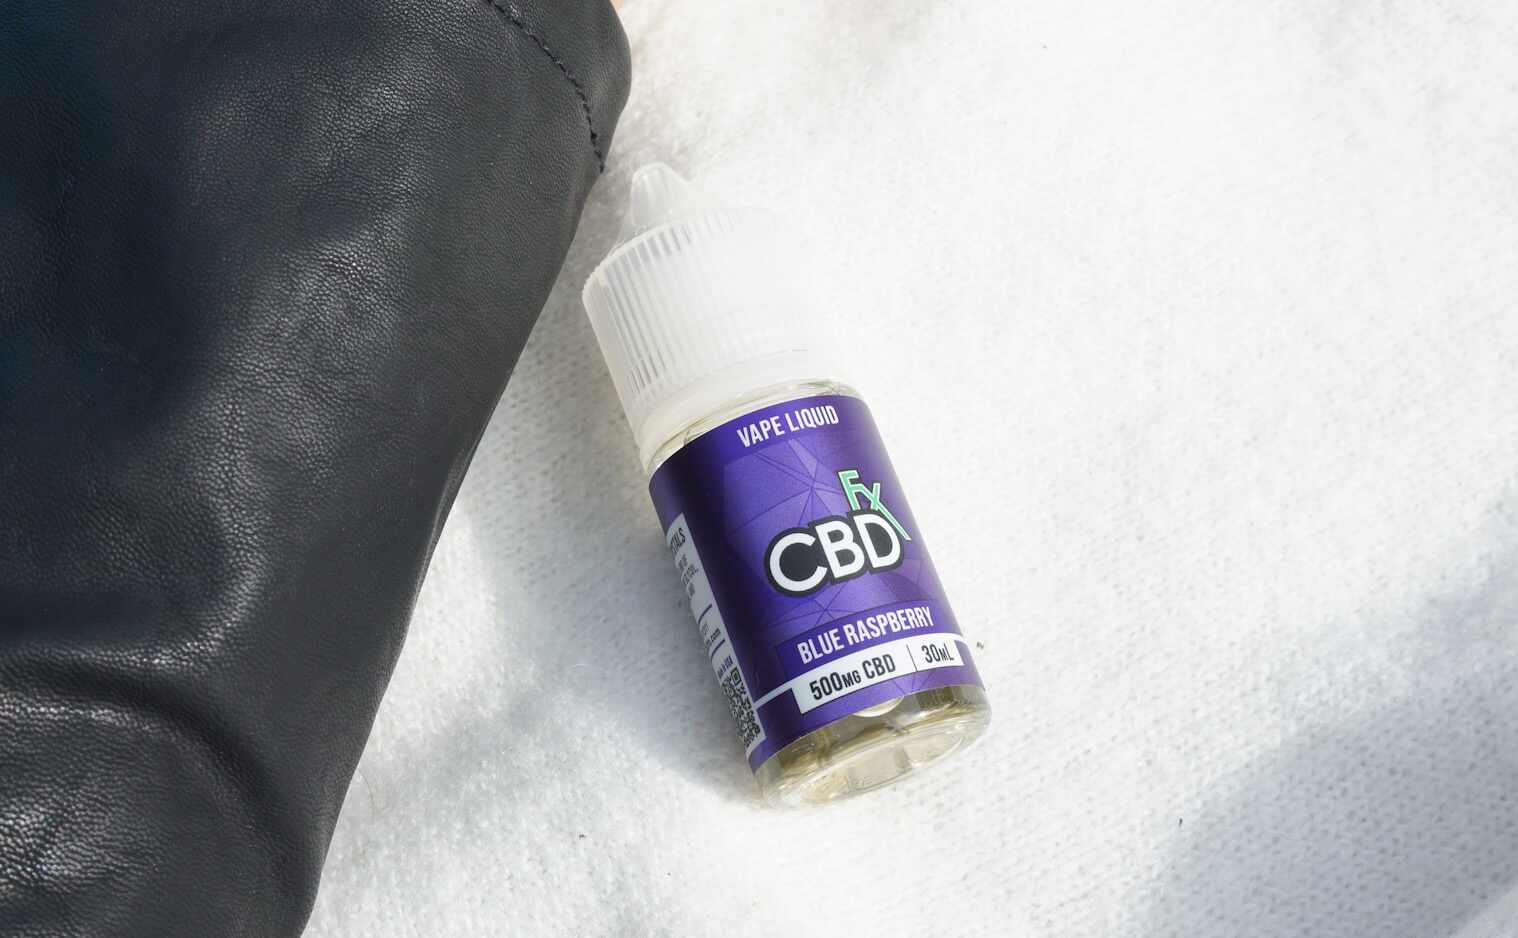 6 Ways To Get The Most Out Of Your CBD Vape Juice